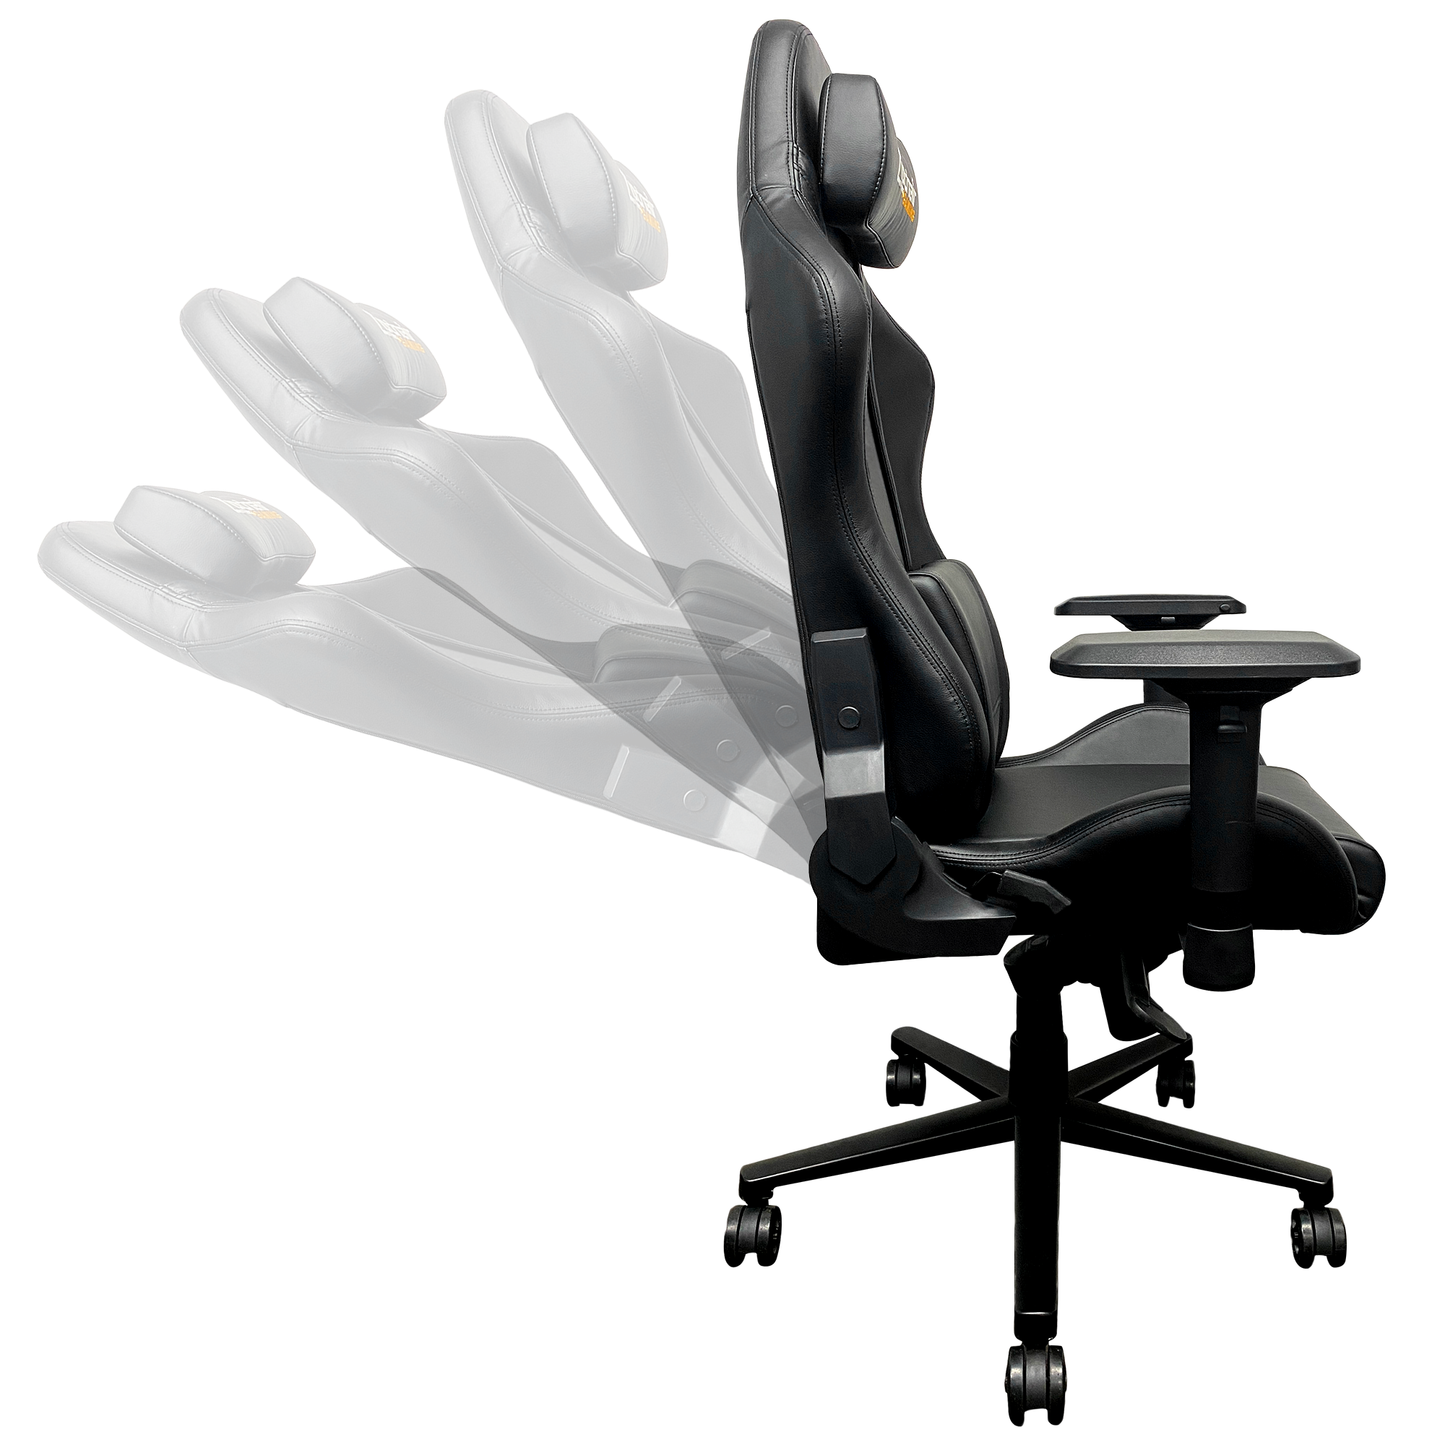 Xpression Pro Gaming Chair with Pittsburgh Penguins Logo